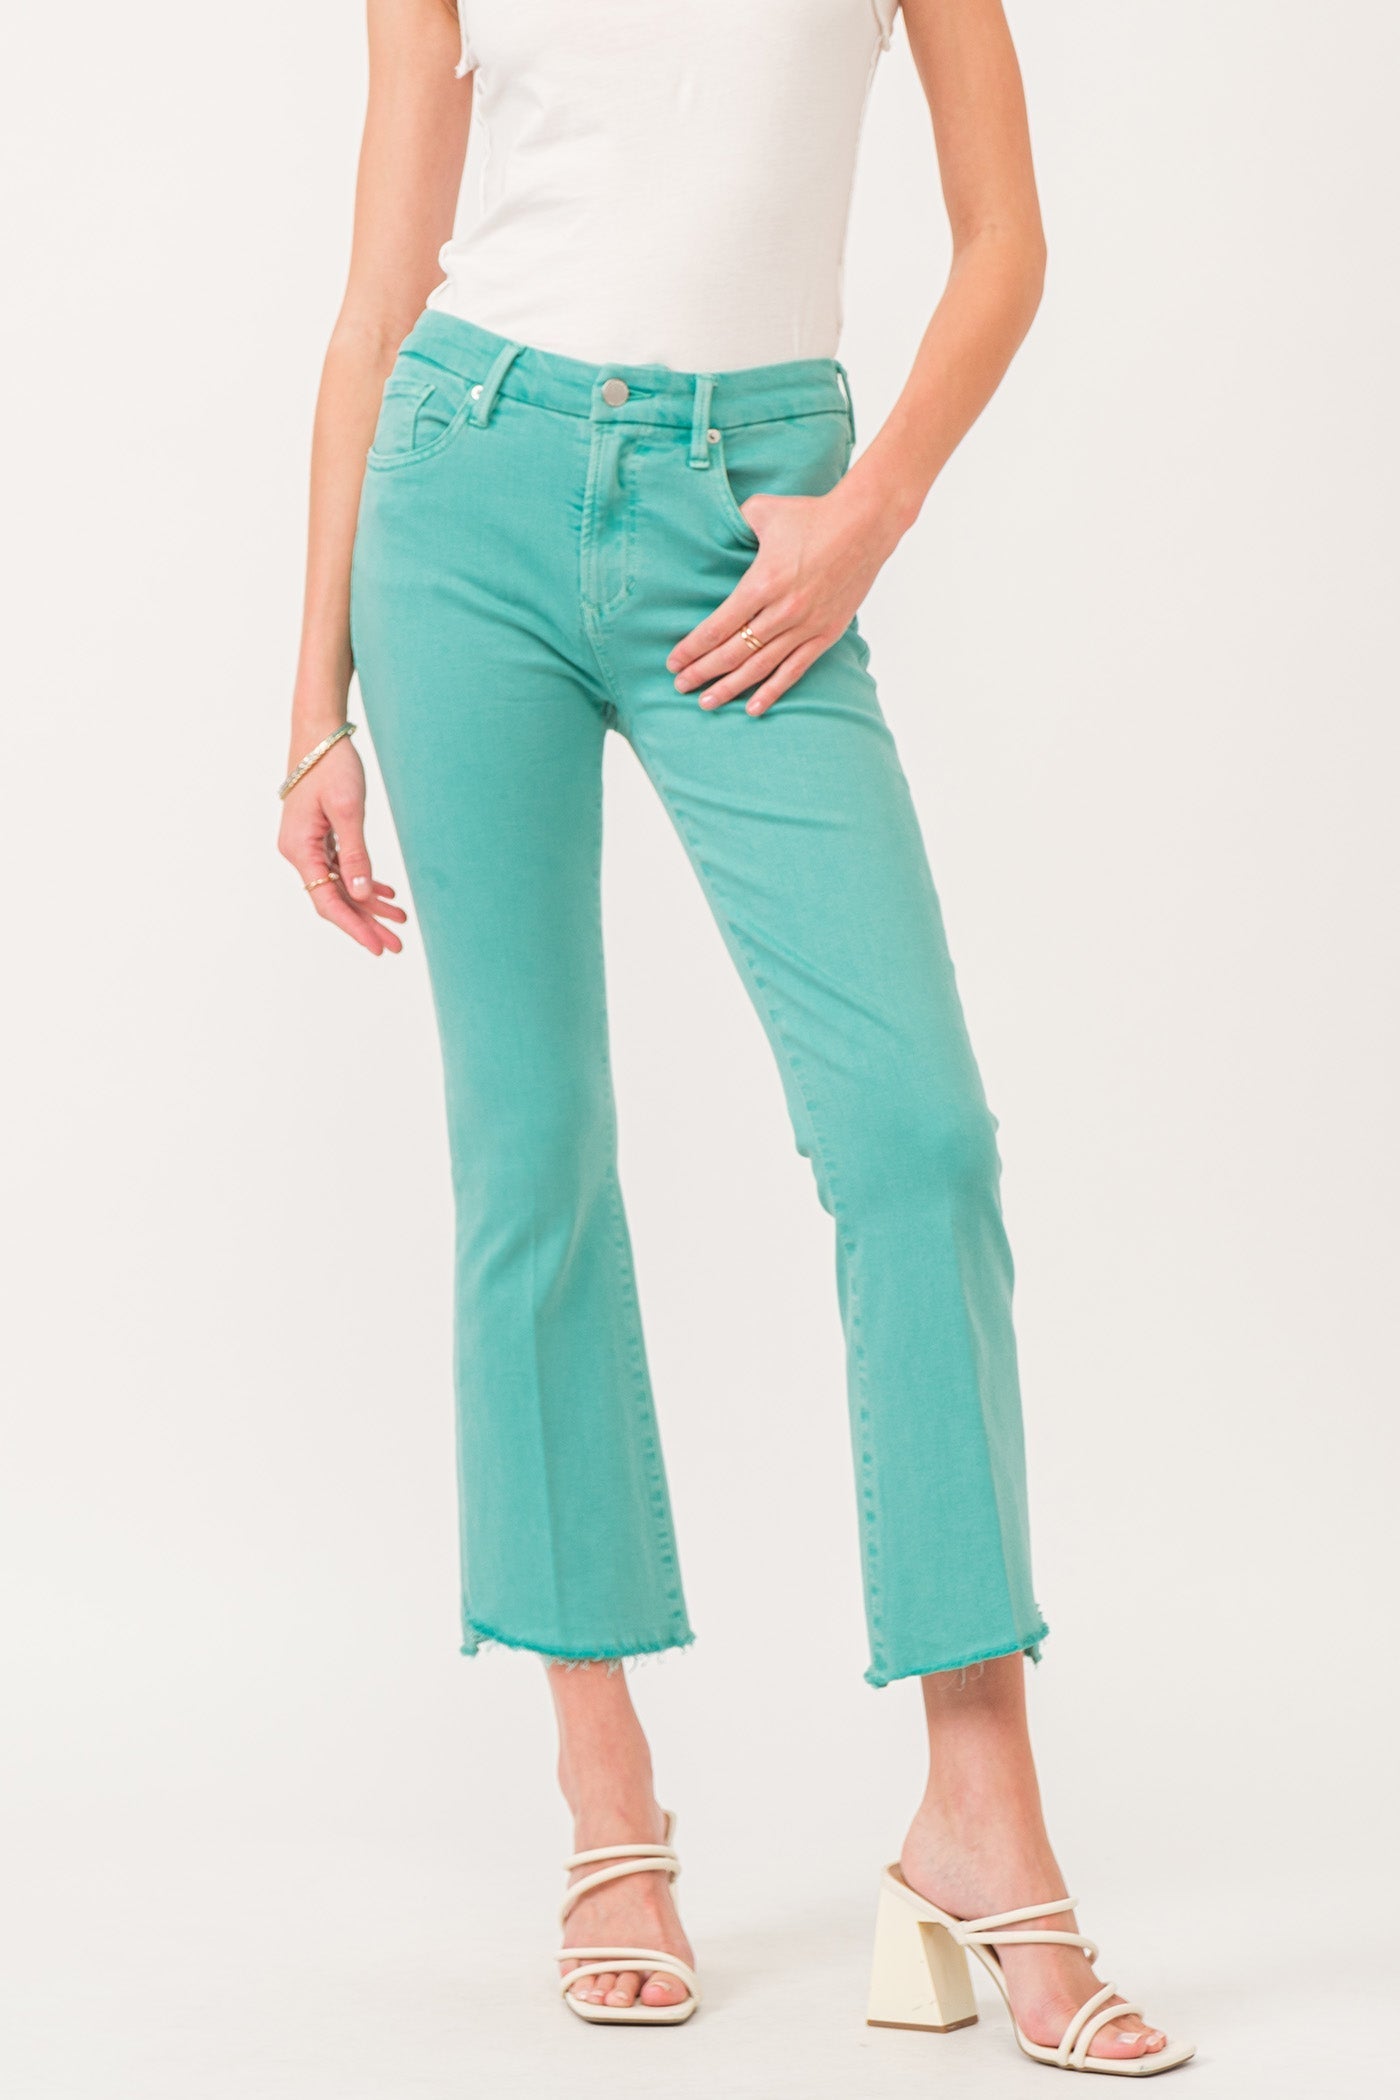 Jeanne High Rise Flare Jeans in Teal